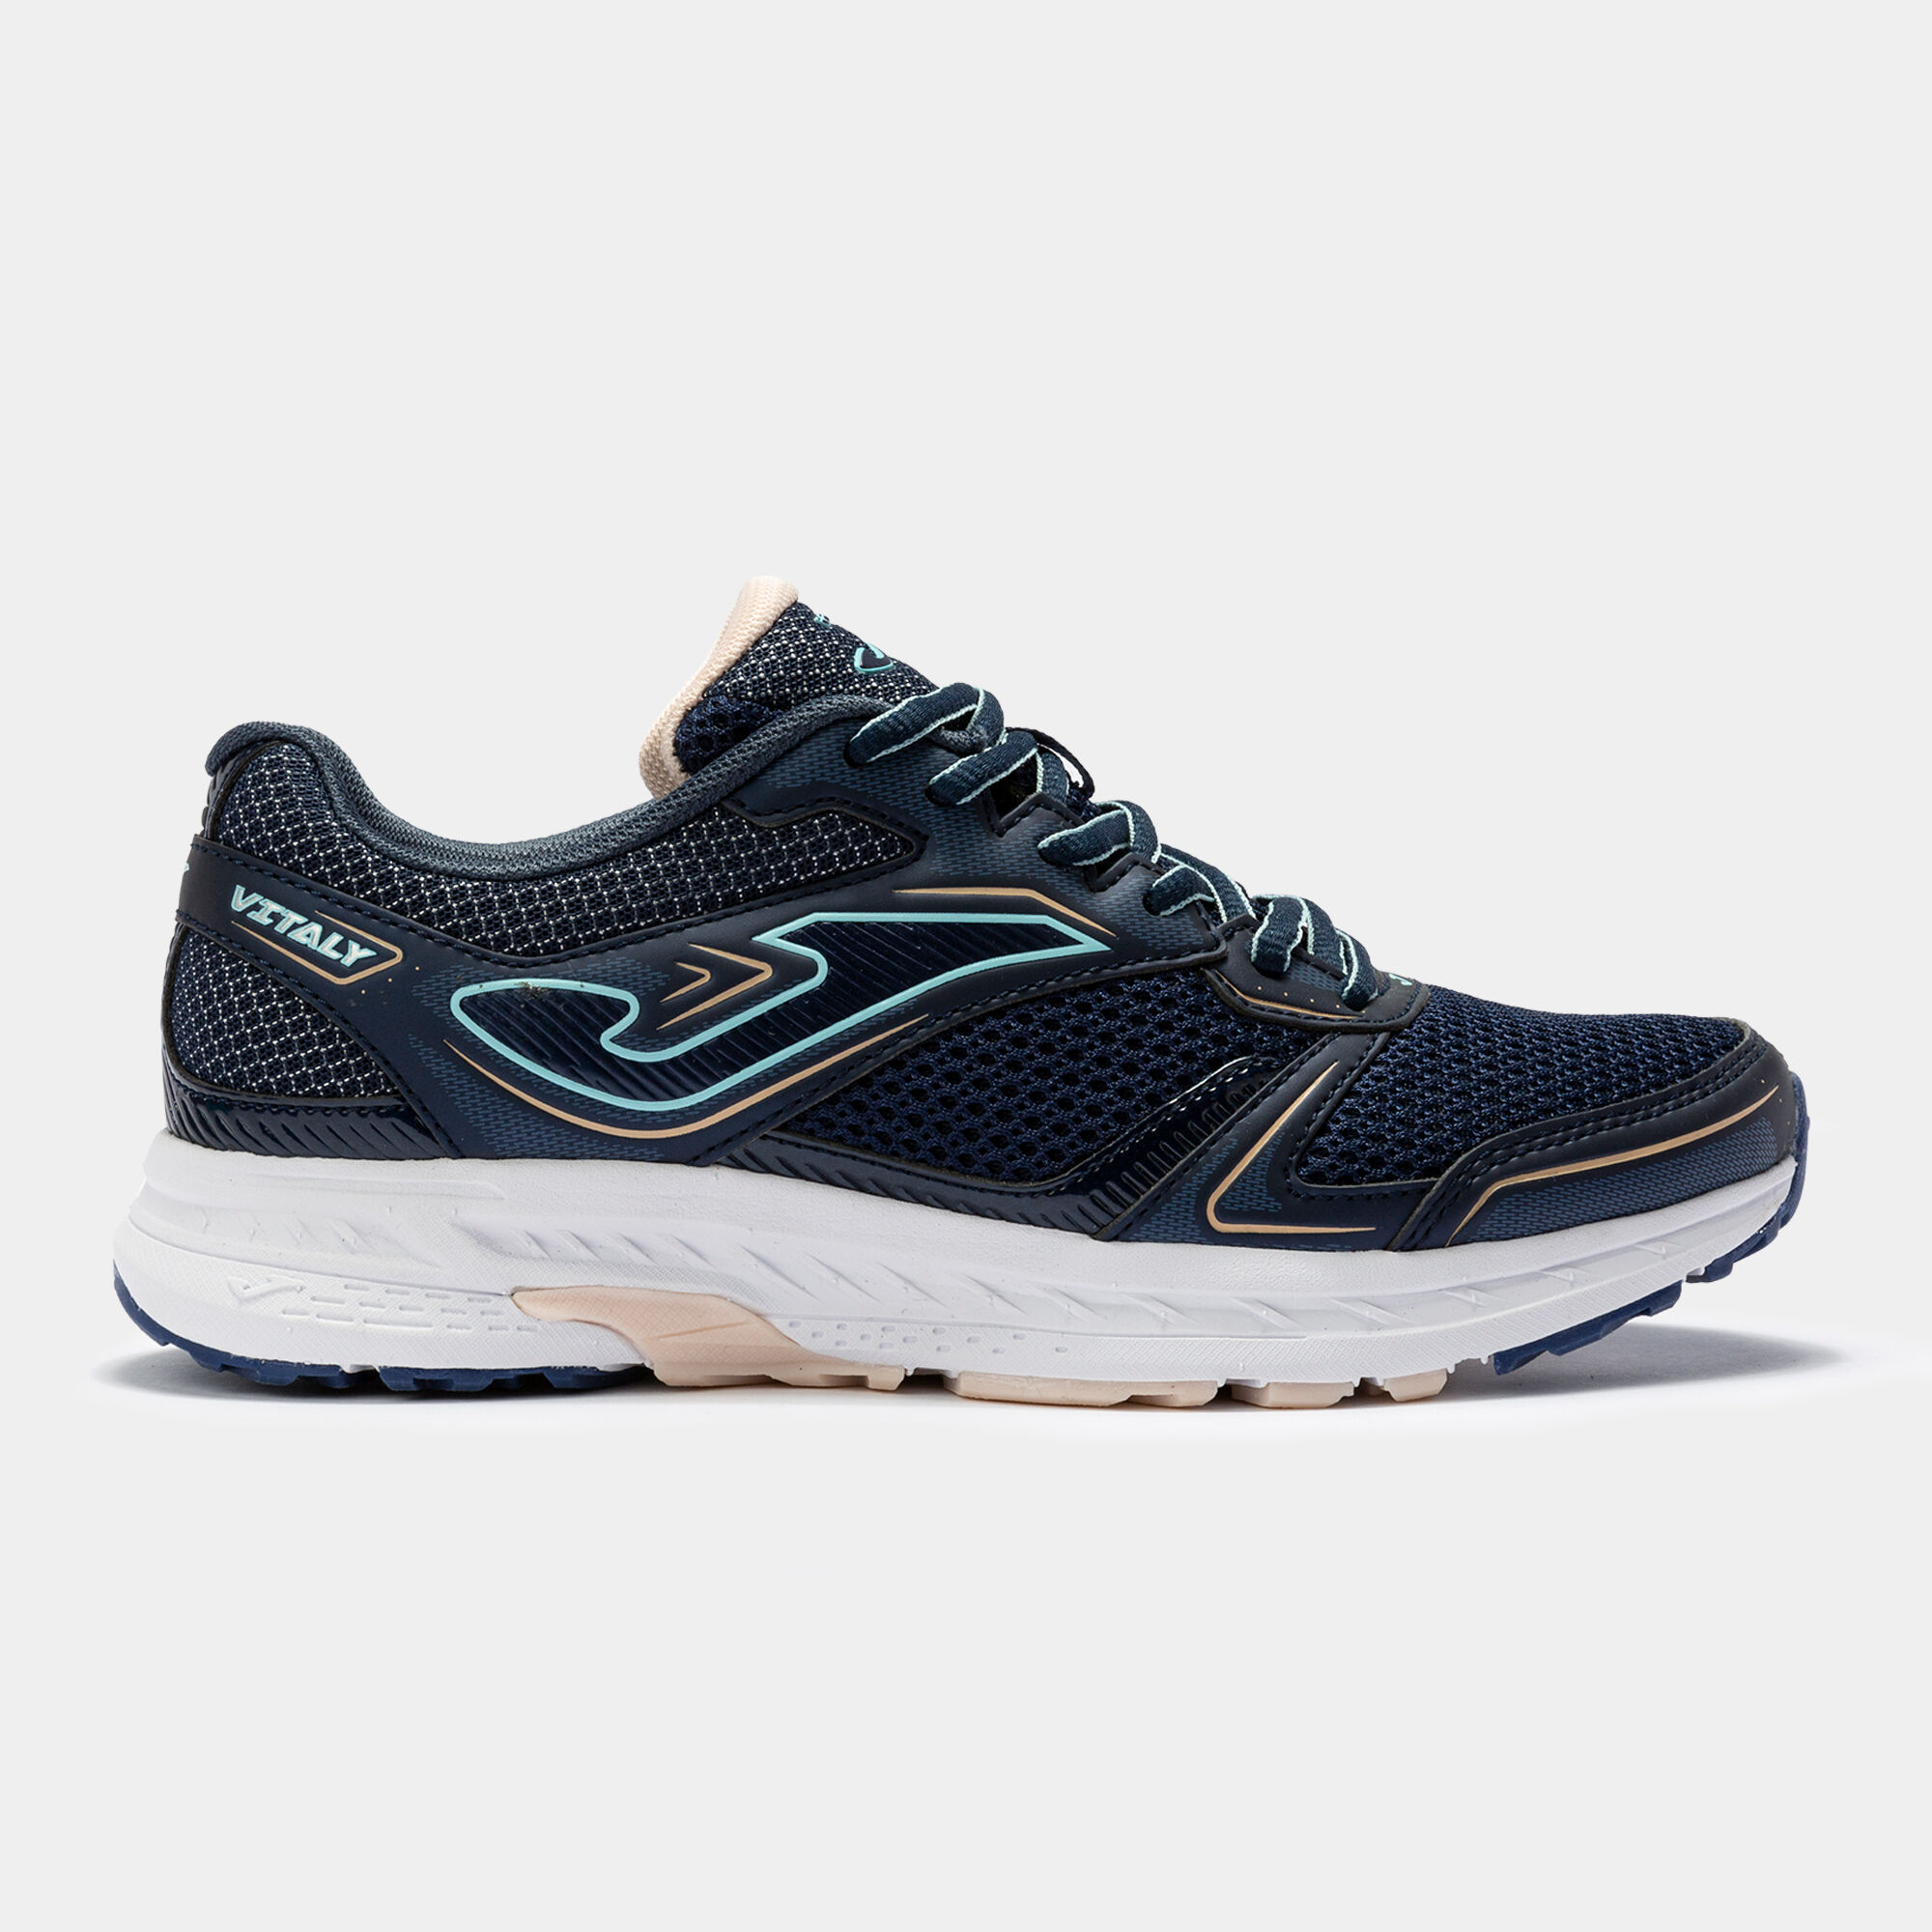 RUNNING SHOES VITALY 22 WOMAN NAVY BLUE PINK